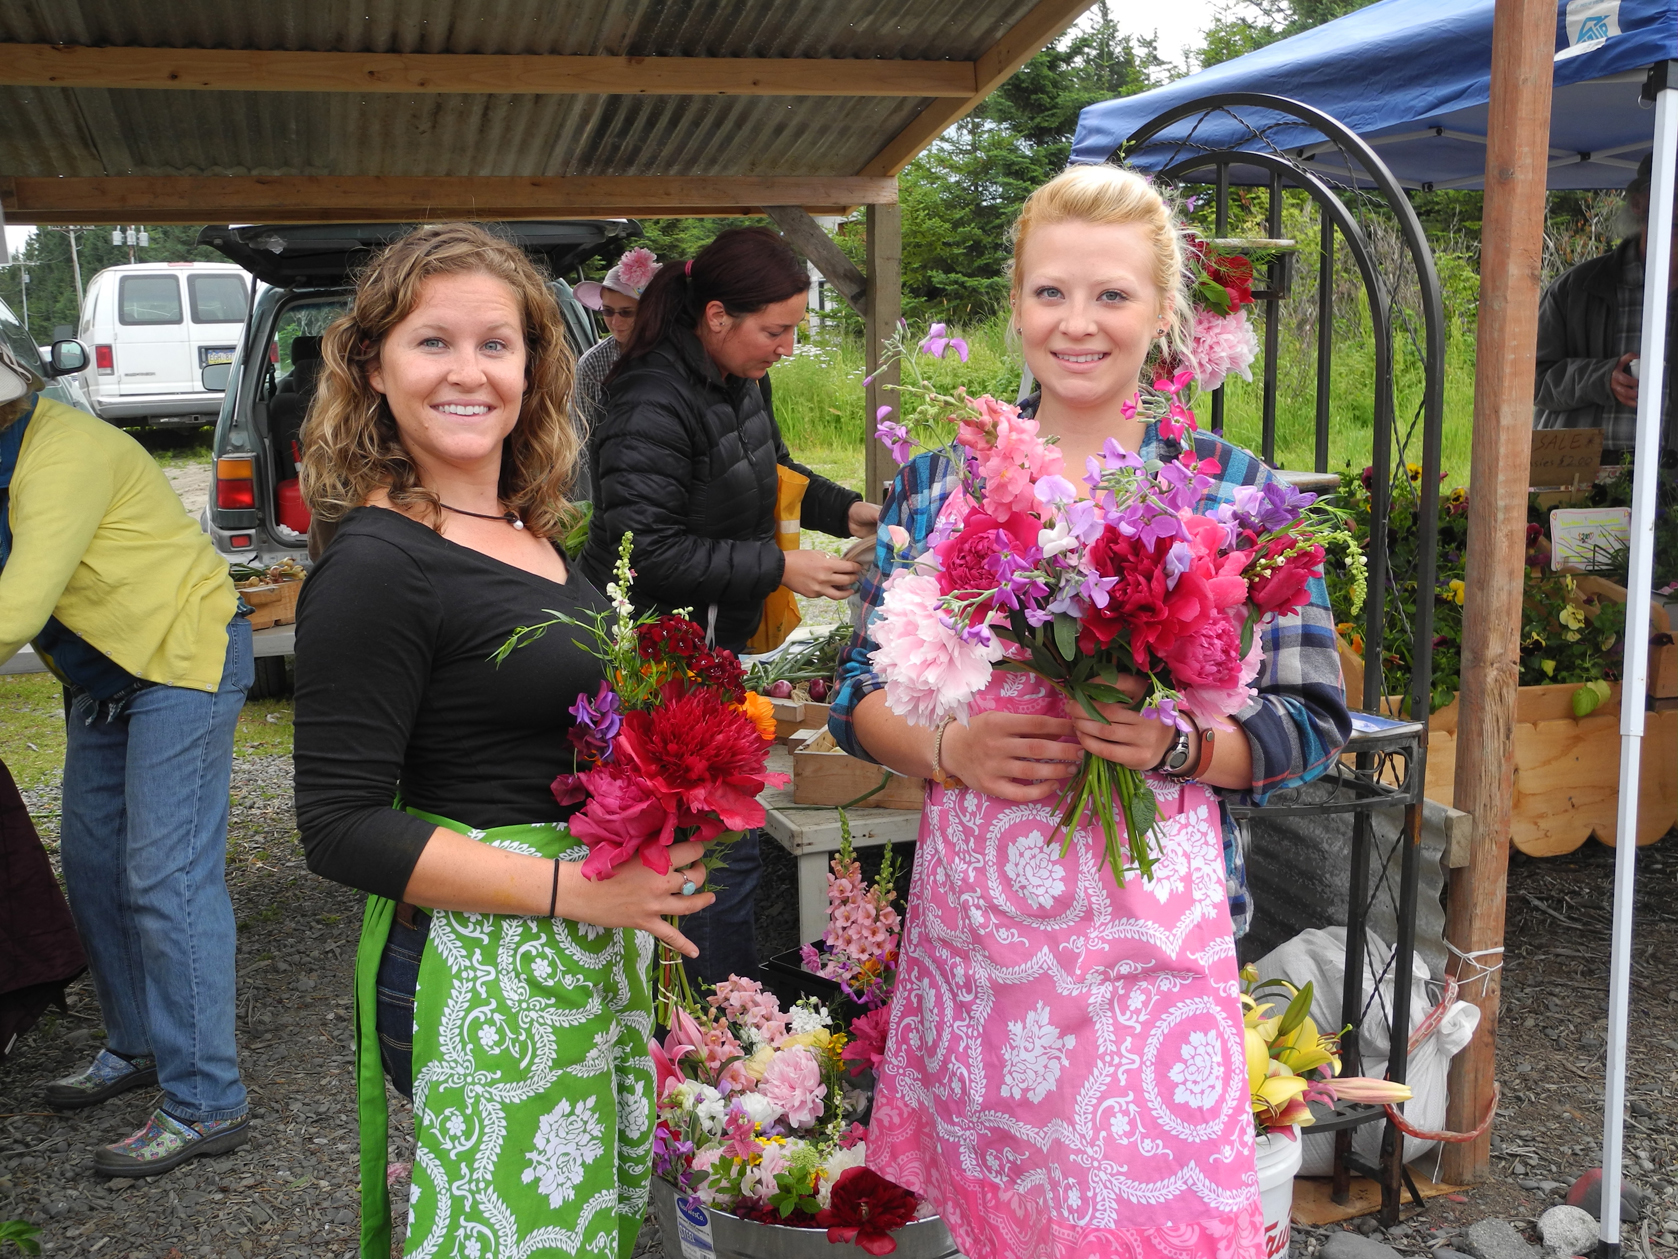 Anna Stewart, left, and Sarah Bodary, right, sell peonies and other flowers at the Homer Farmers Market last August.            -Photo by Michael Armstrong, Homer News